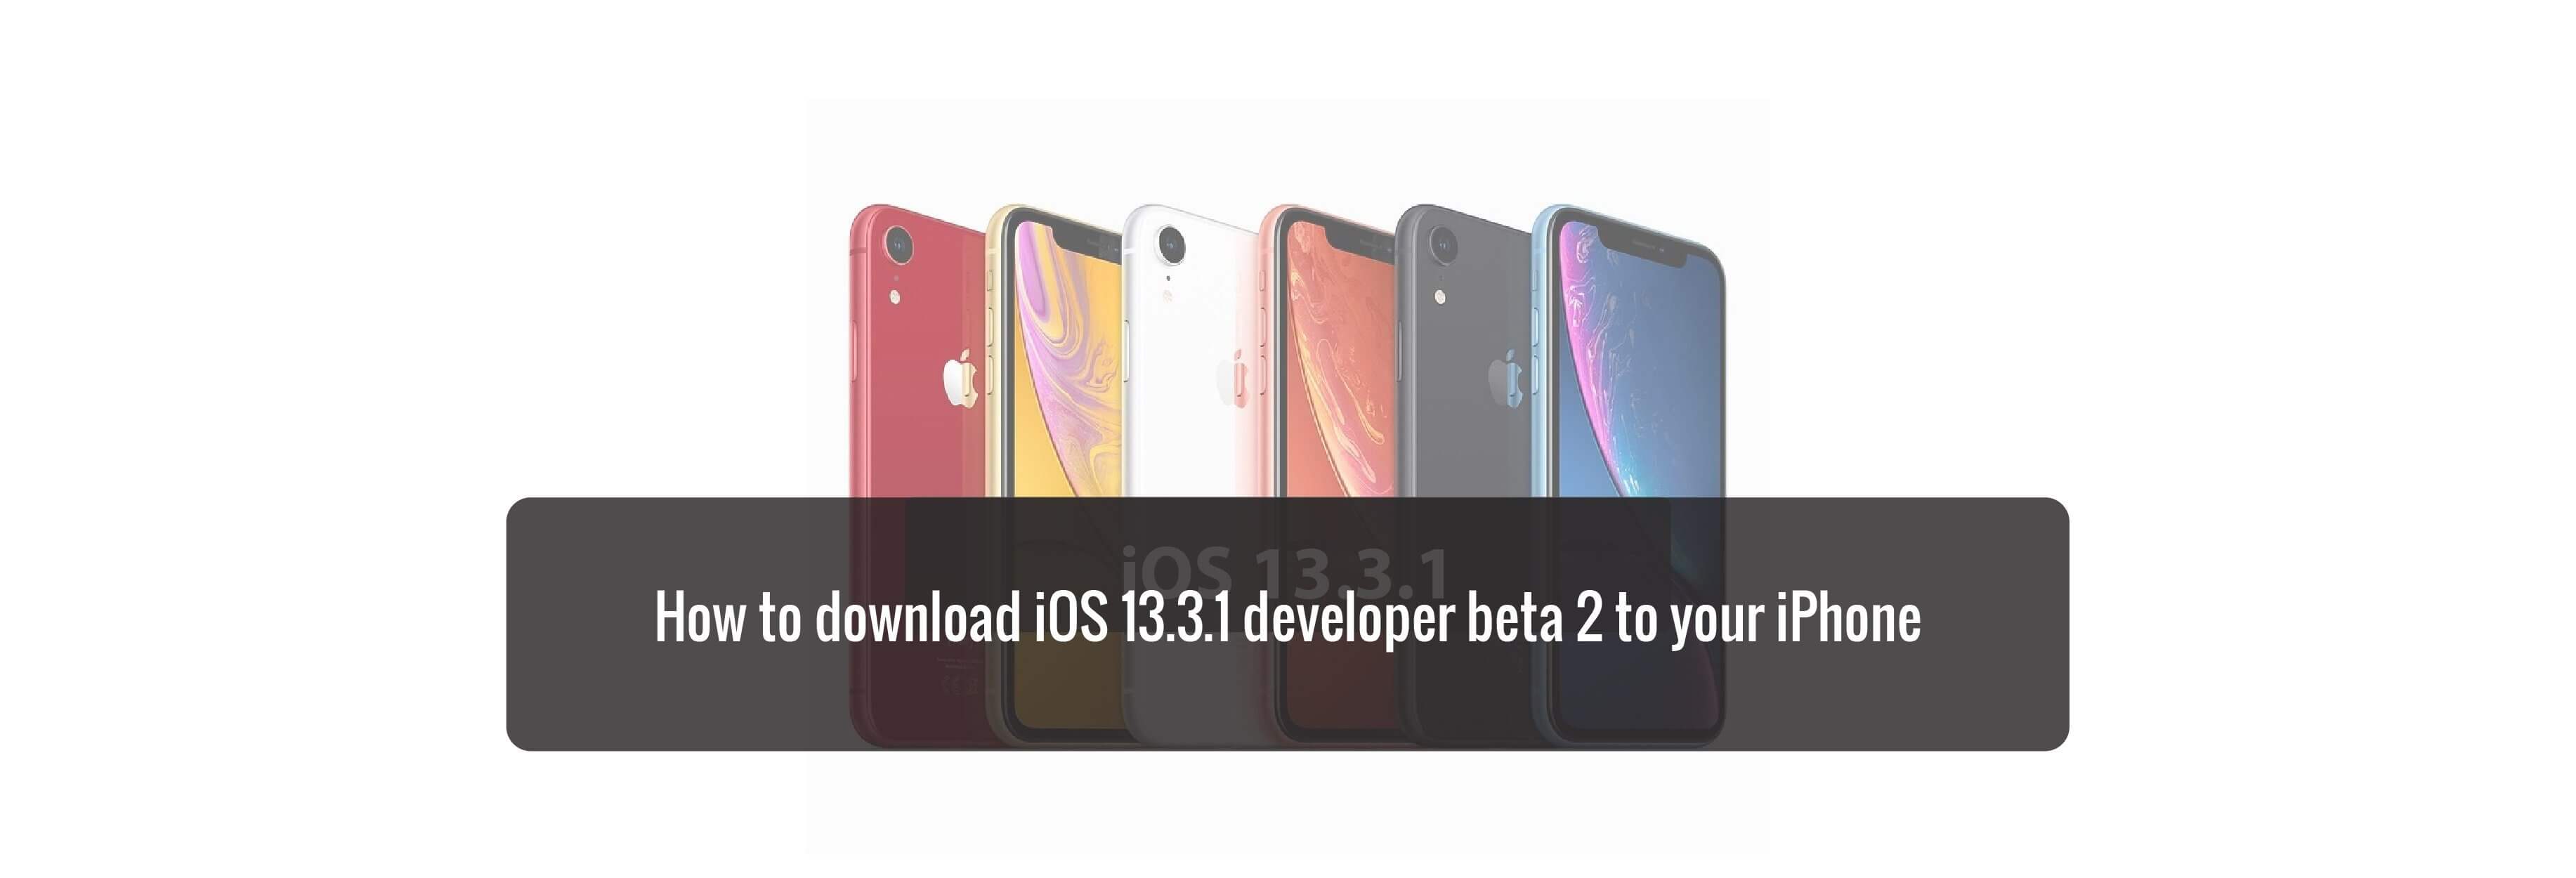 How to download iOS 13.3.1 developer beta 2 to your iPhone